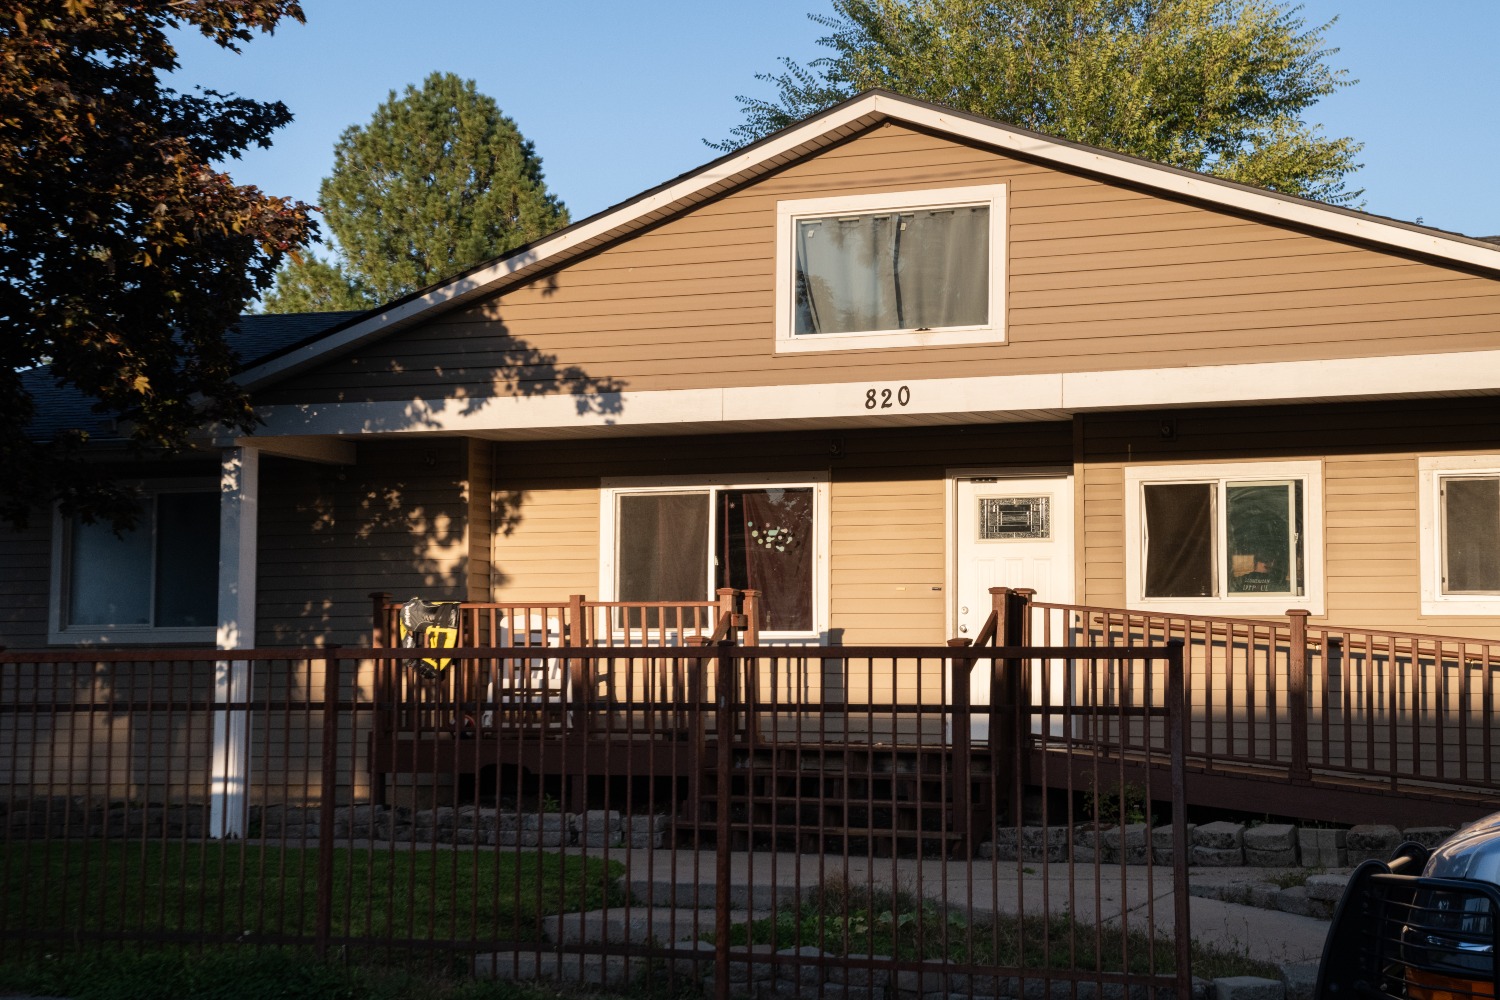 Idaho youth treatment home exposed in InvestigateWest investigation closes down